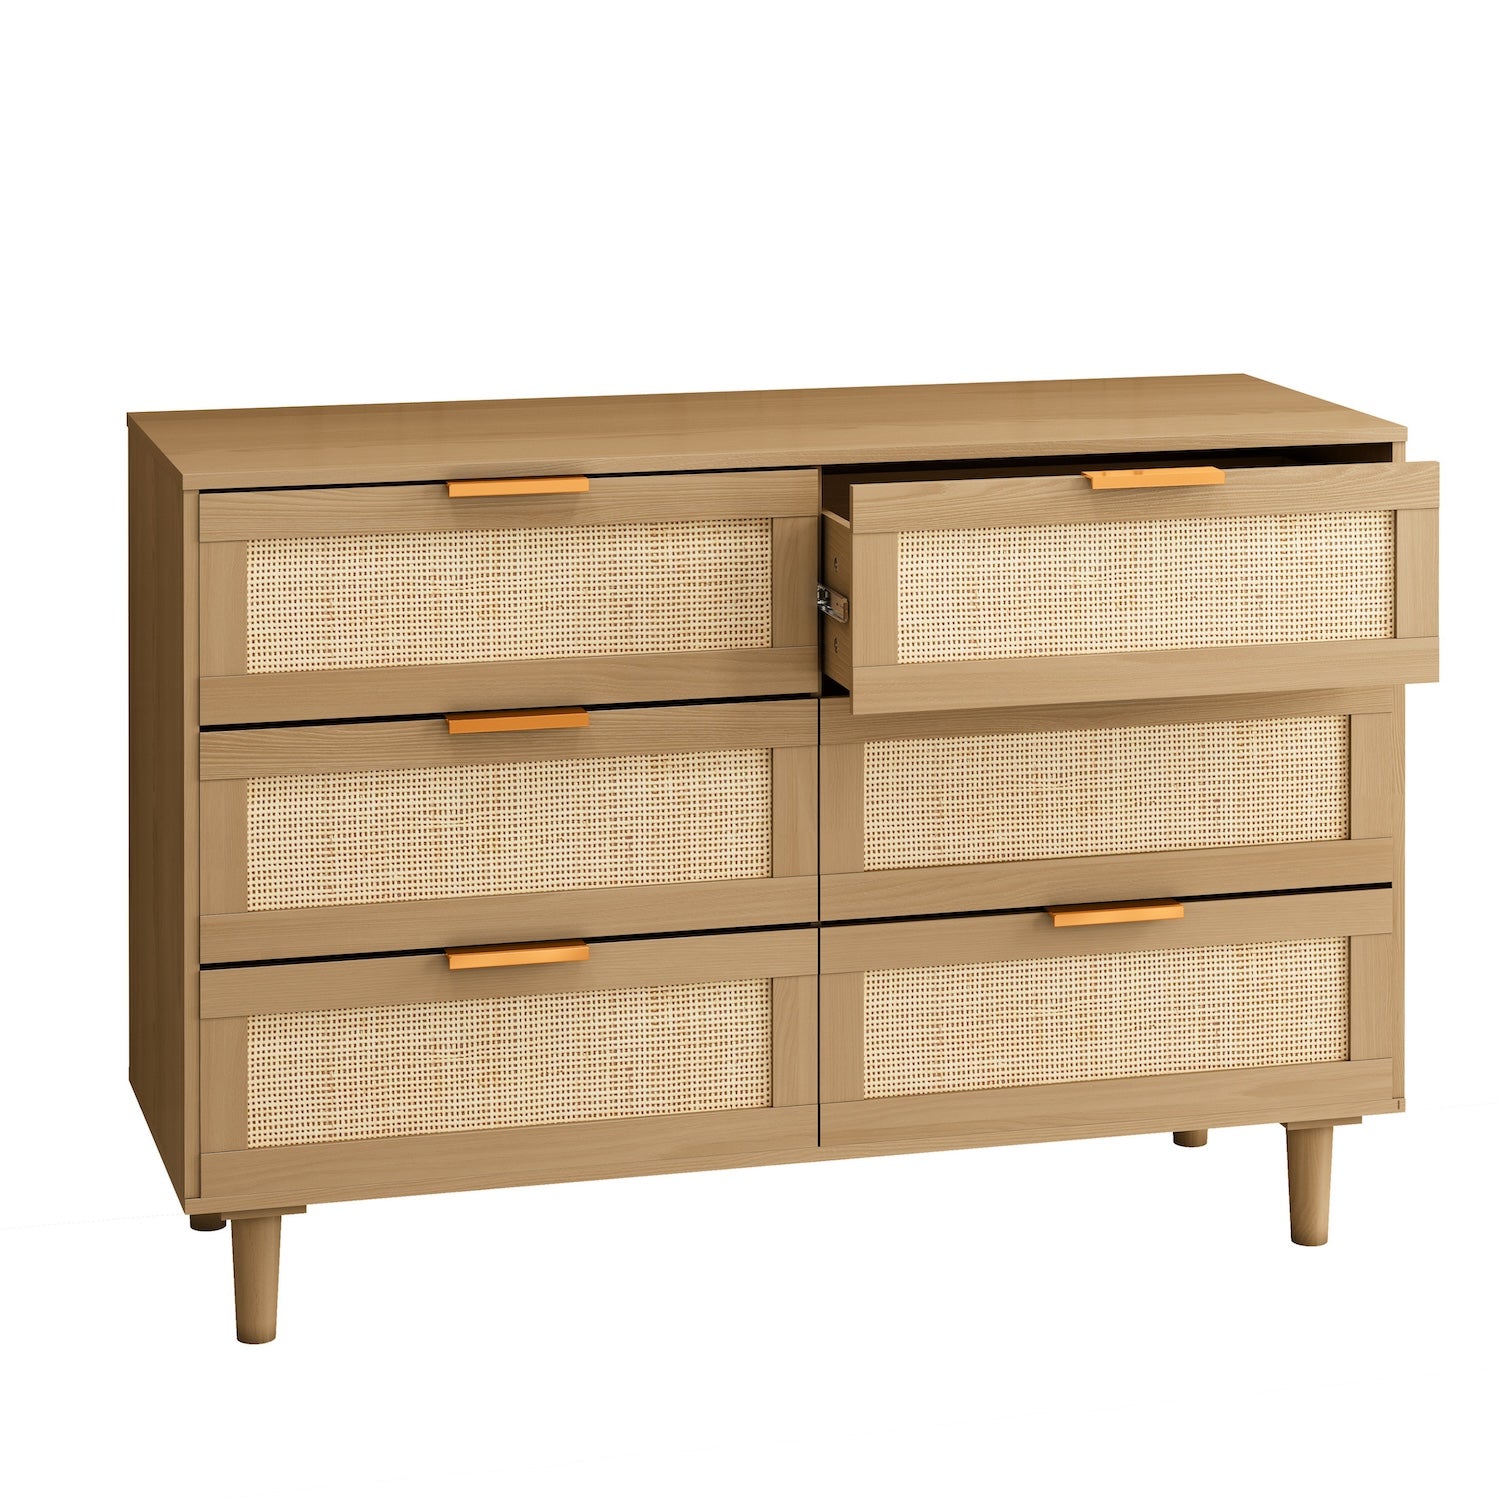 Cosyliving 6-Drawer Dresser with Rattan Drawer Fronts - Oak